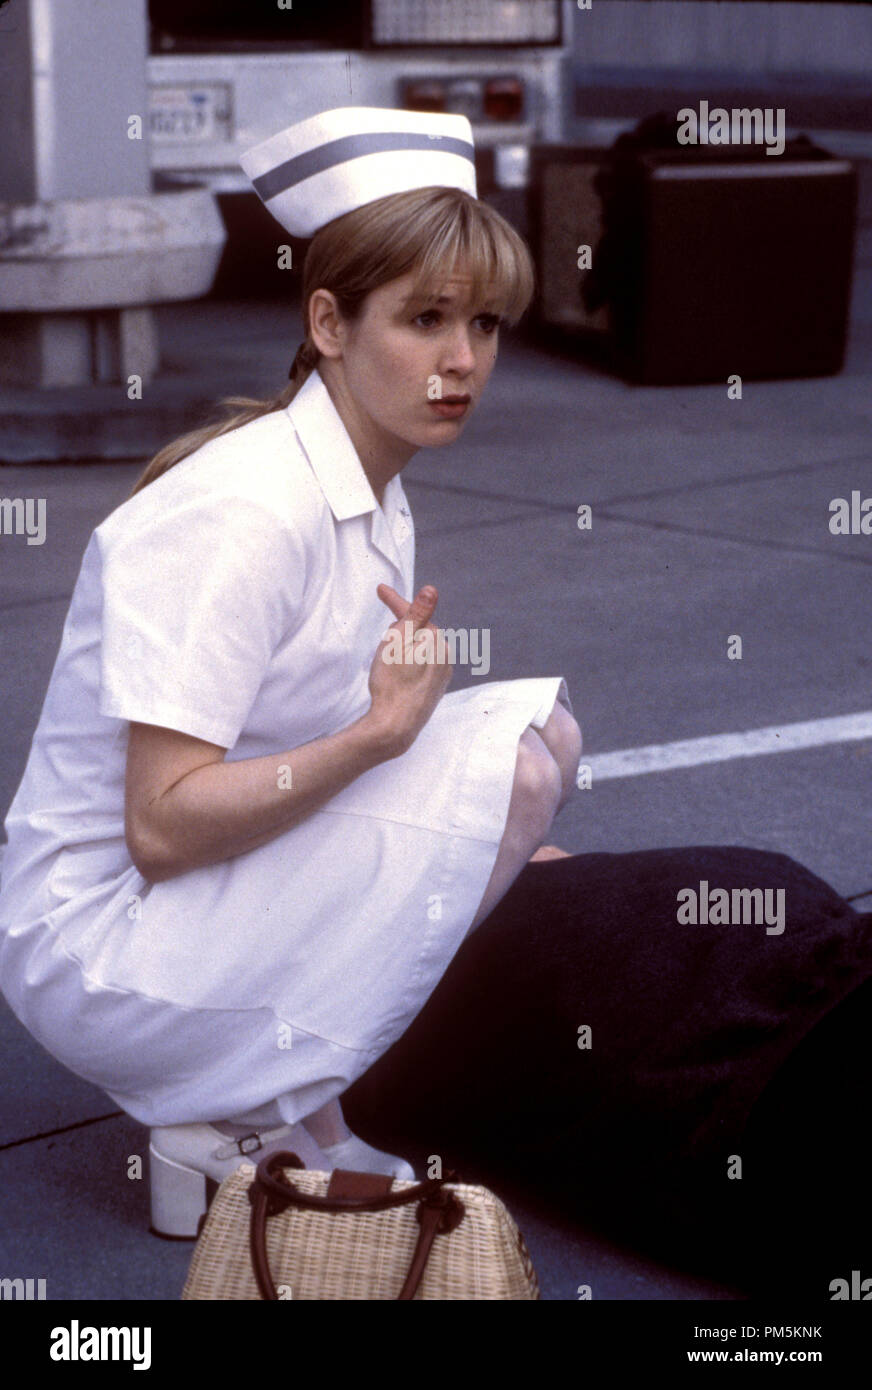 Film Still / Publicity Stills from 'Nurse Betty' Renee Zellweger © 2000 USA Films Photo Credit: Bruce Birmelin File Reference # 30846318THA  For Editorial Use Only -  All Rights Reserved Stock Photo